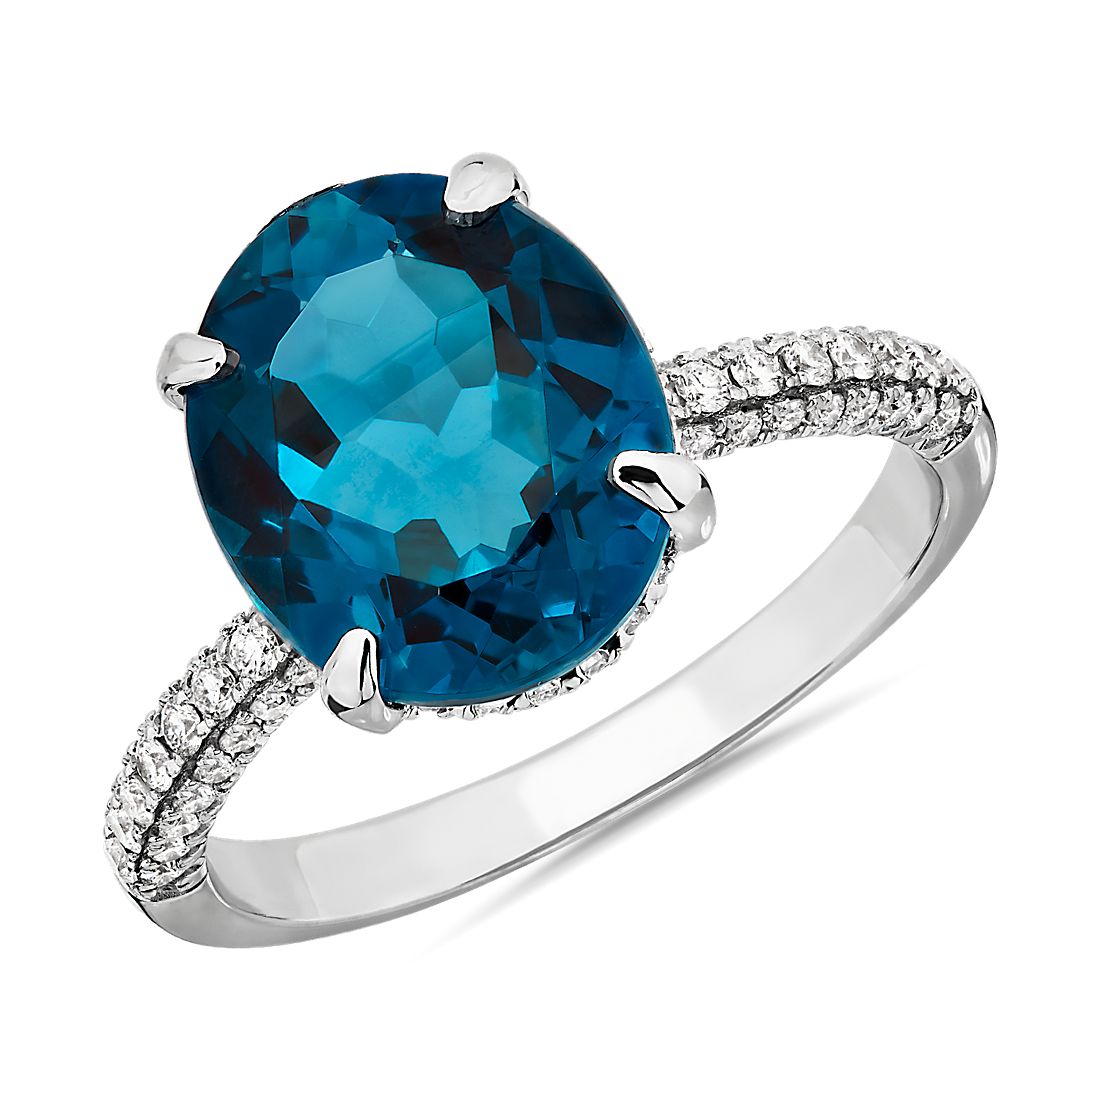 Oval London Blue Topaz Statement Ring in 14k White Gold